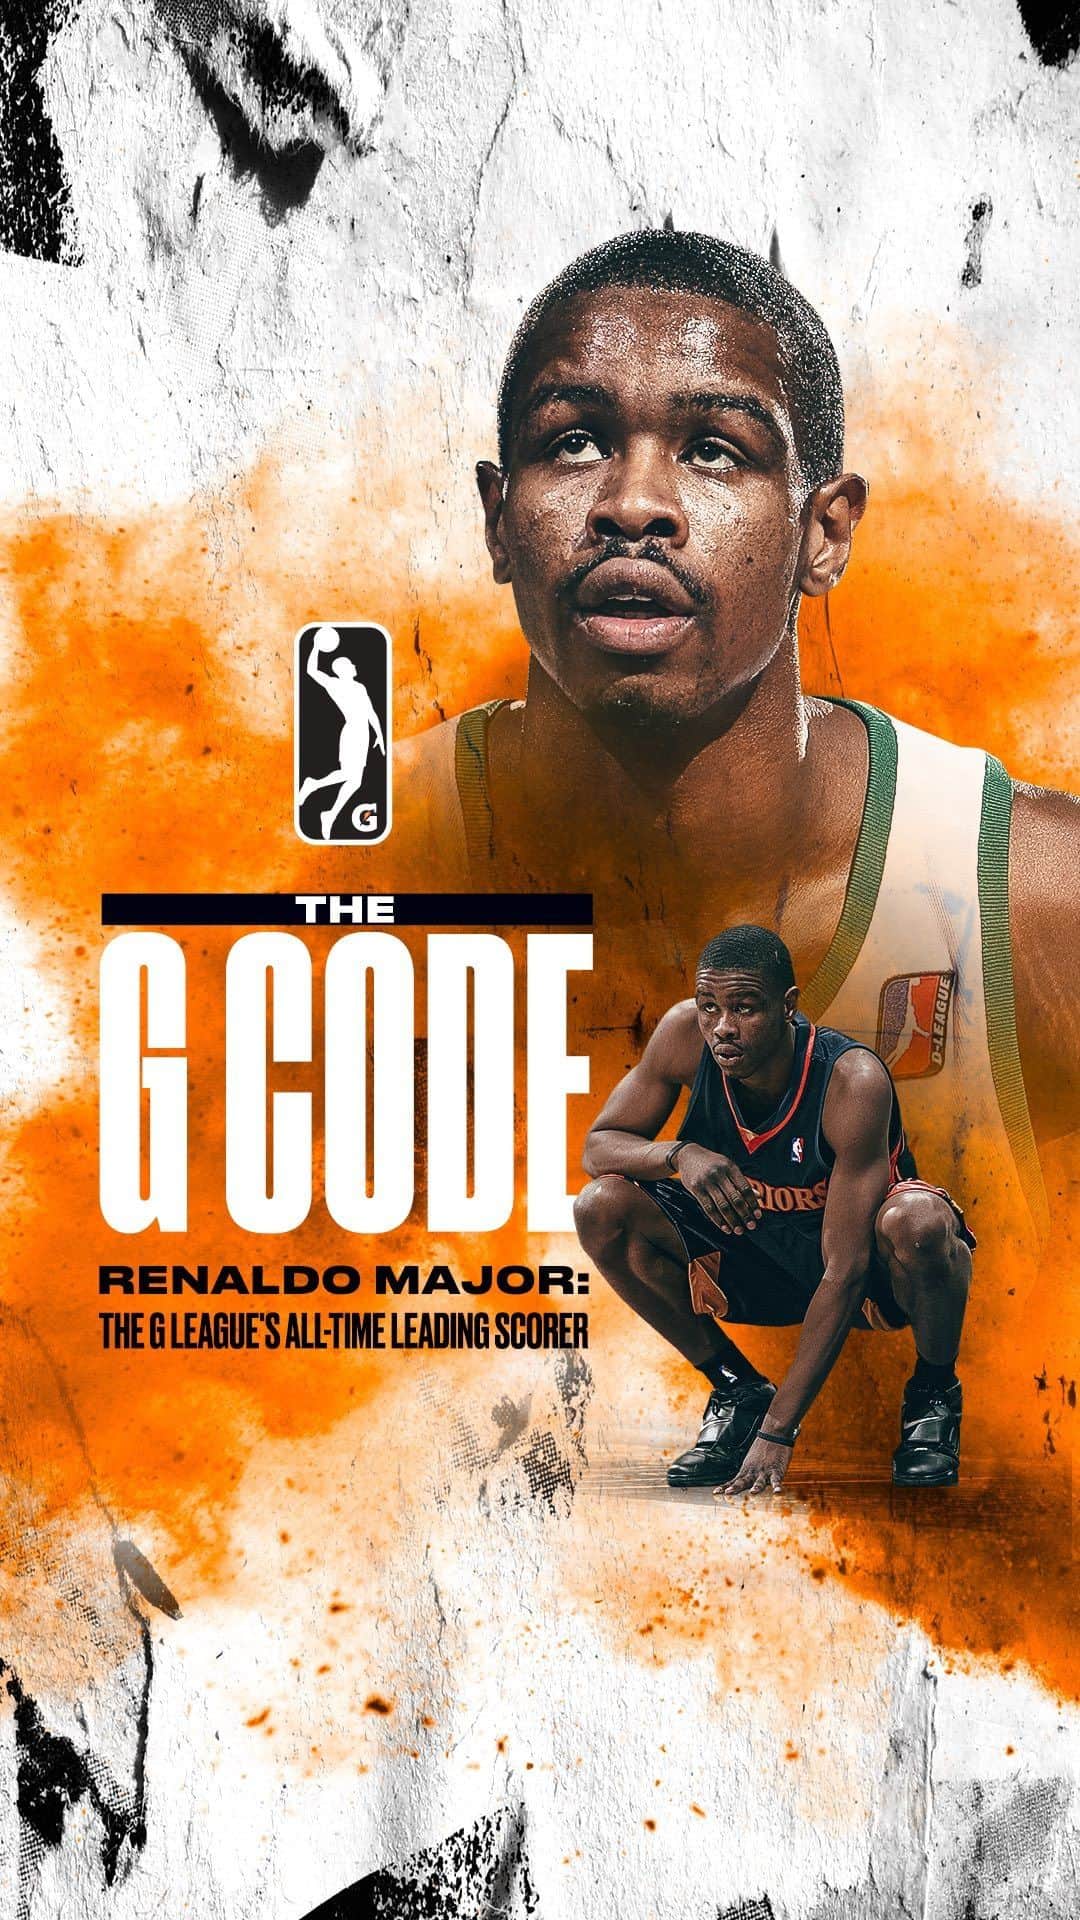 NBAのインスタグラム：「Everyone knows the @nba all-time leading scorer, @kingjames, but who is the G League’s? That man is Renaldo Major - a 10-year G League vet who played 1 game for the @warriors and overcame open-heart surgery to become one of the GOAT’s of the G. 🐐   @jeffreysosa300 flew out to South Dakota to meet with the legend in the first episode of The G Code: Untold Stories of the G League. Check it out on YouTube now (link in our bio)!」